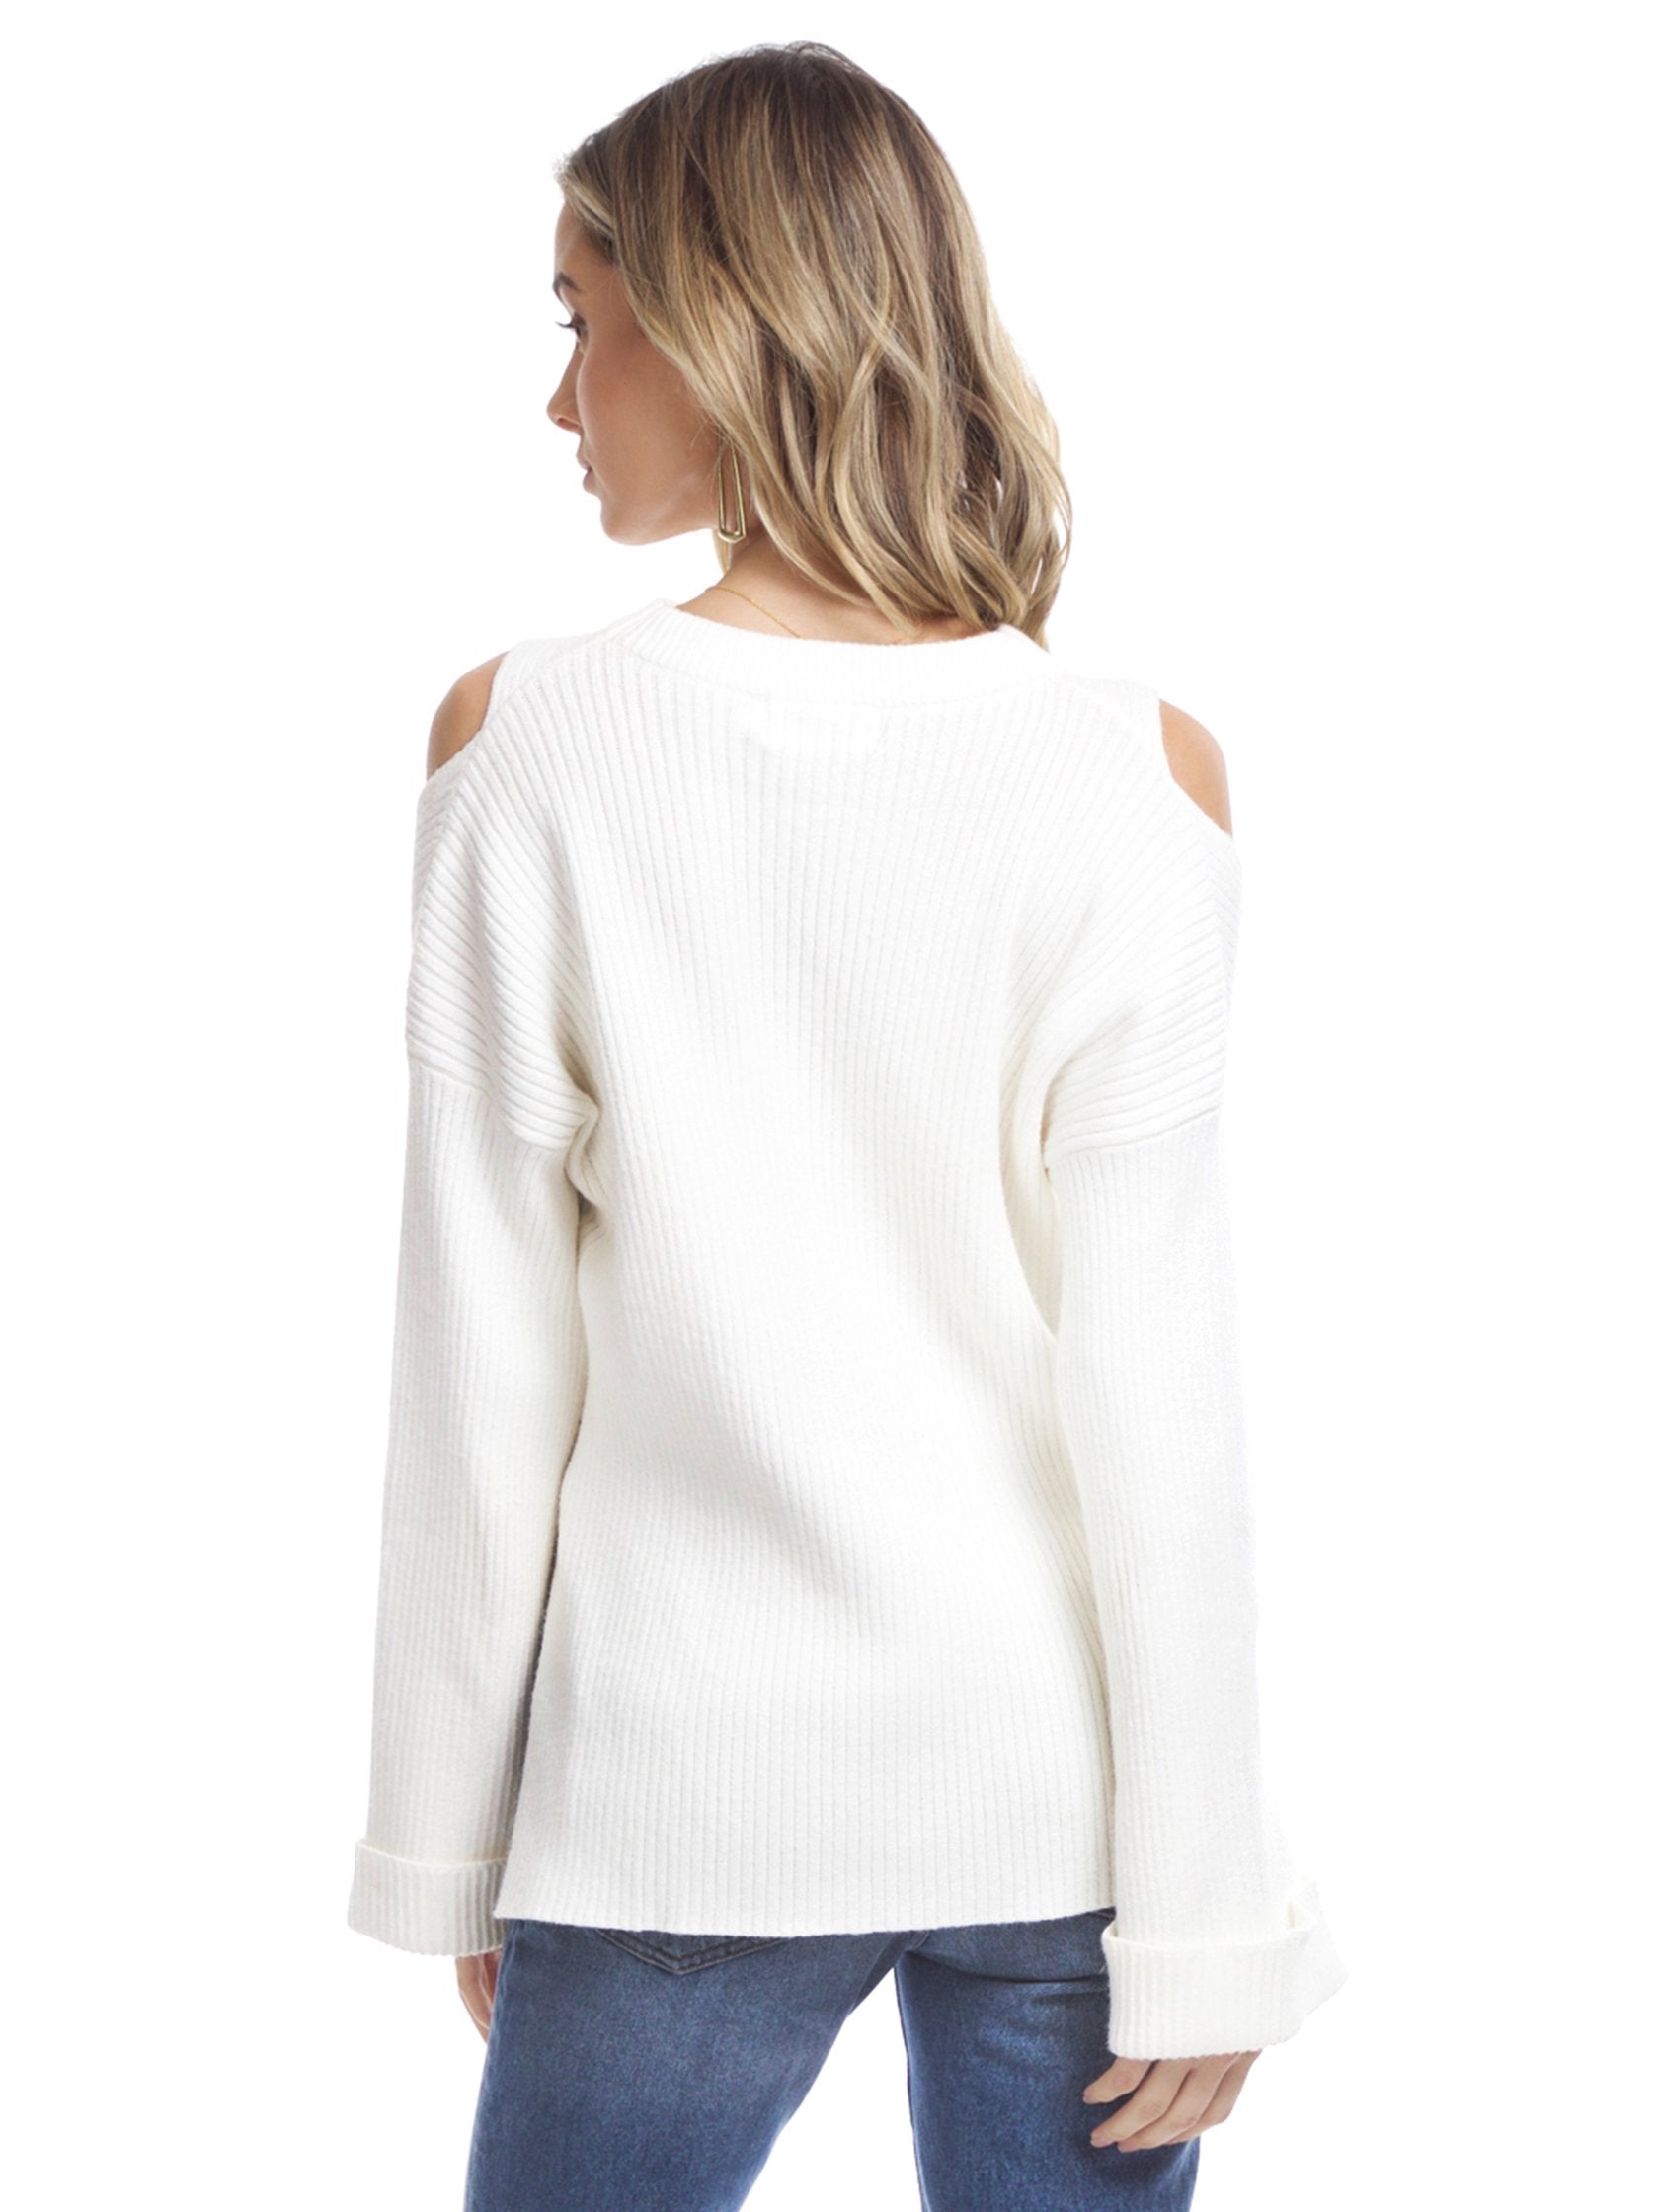 Women outfit in a sweater rental from Line & Dot called Trou Cold Shoulder Sweater